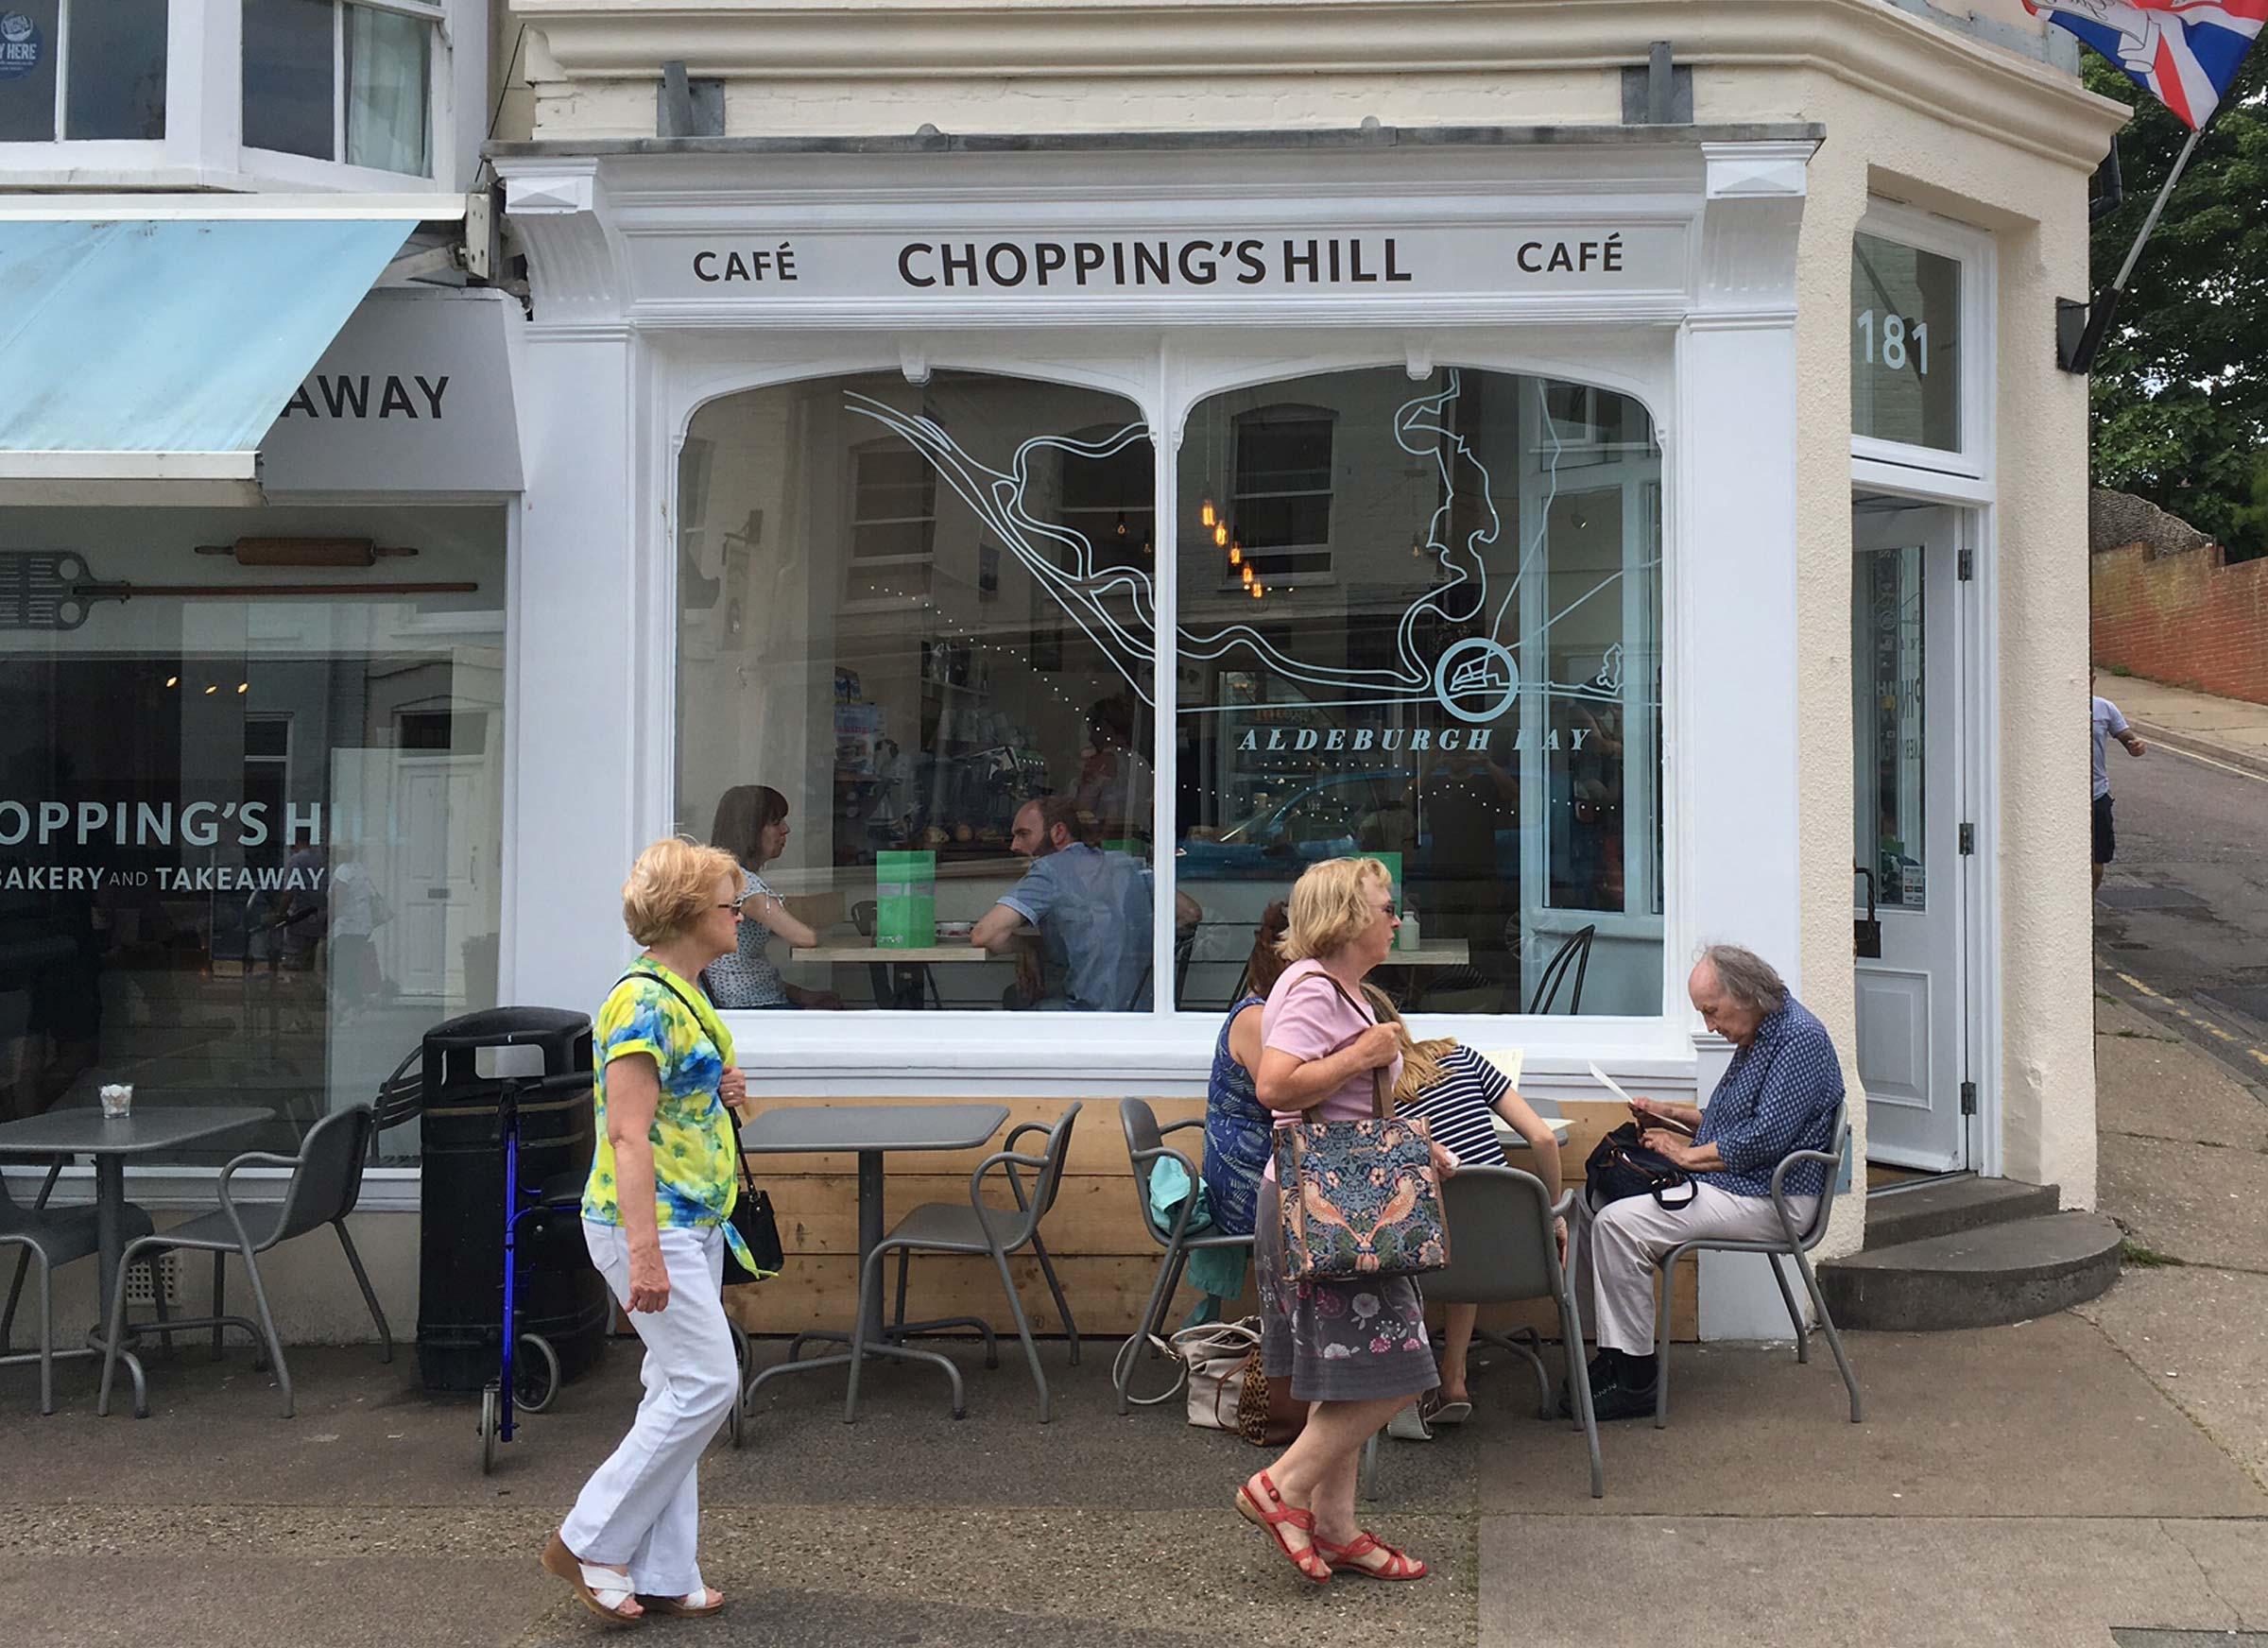 Chopping’s Hill Café and Bakery